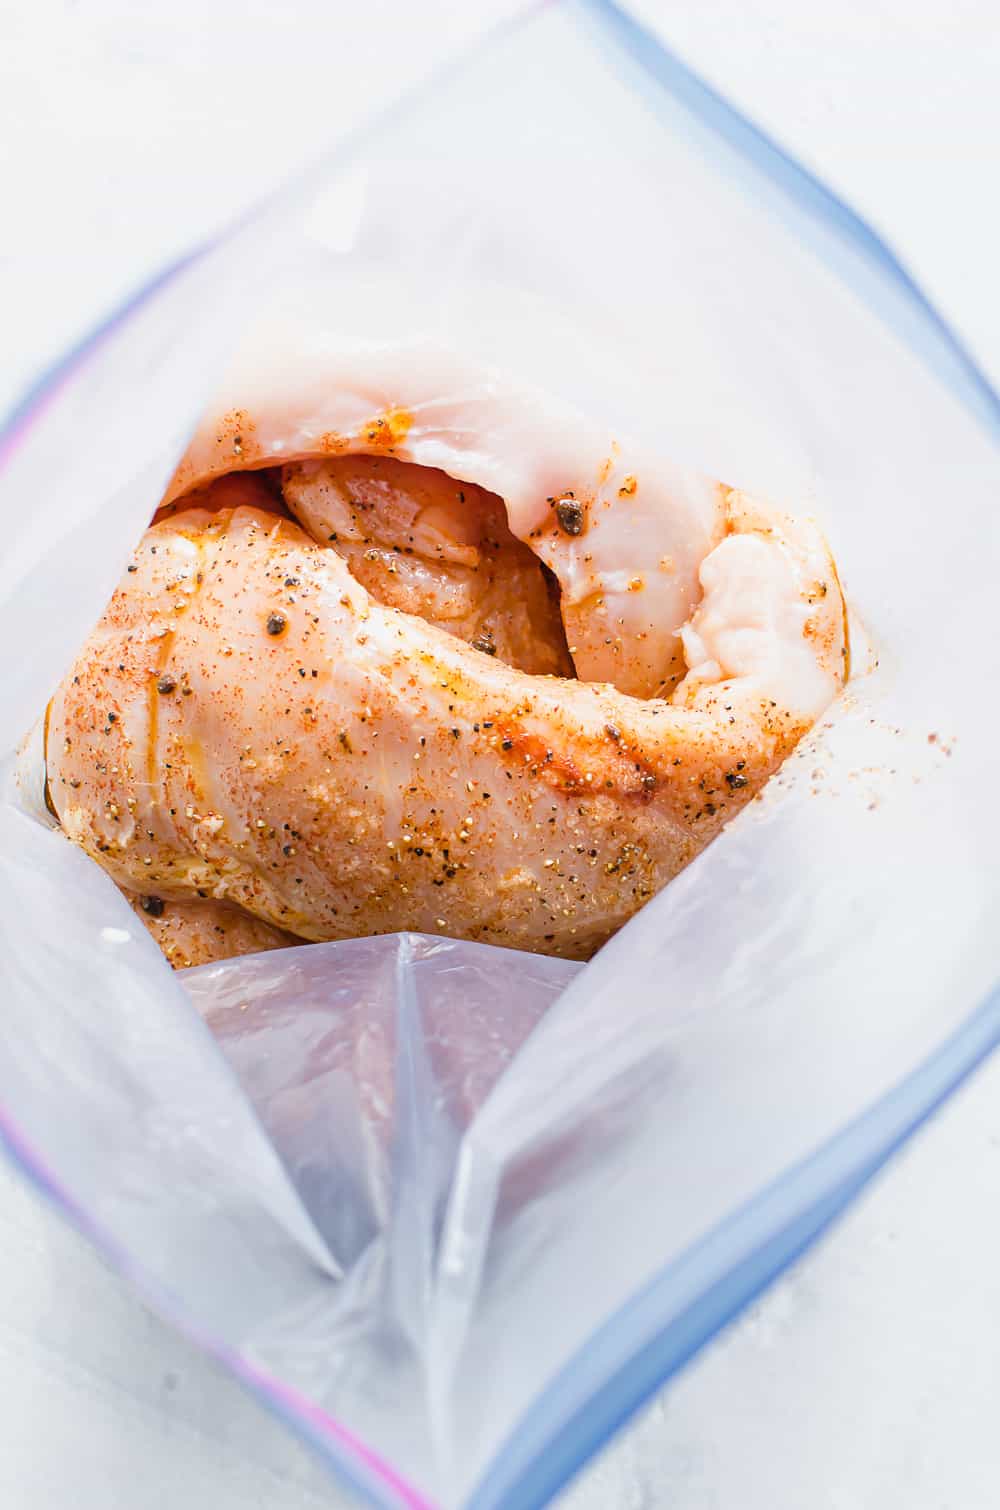 Chicken breasts marinating in a freezer bag.